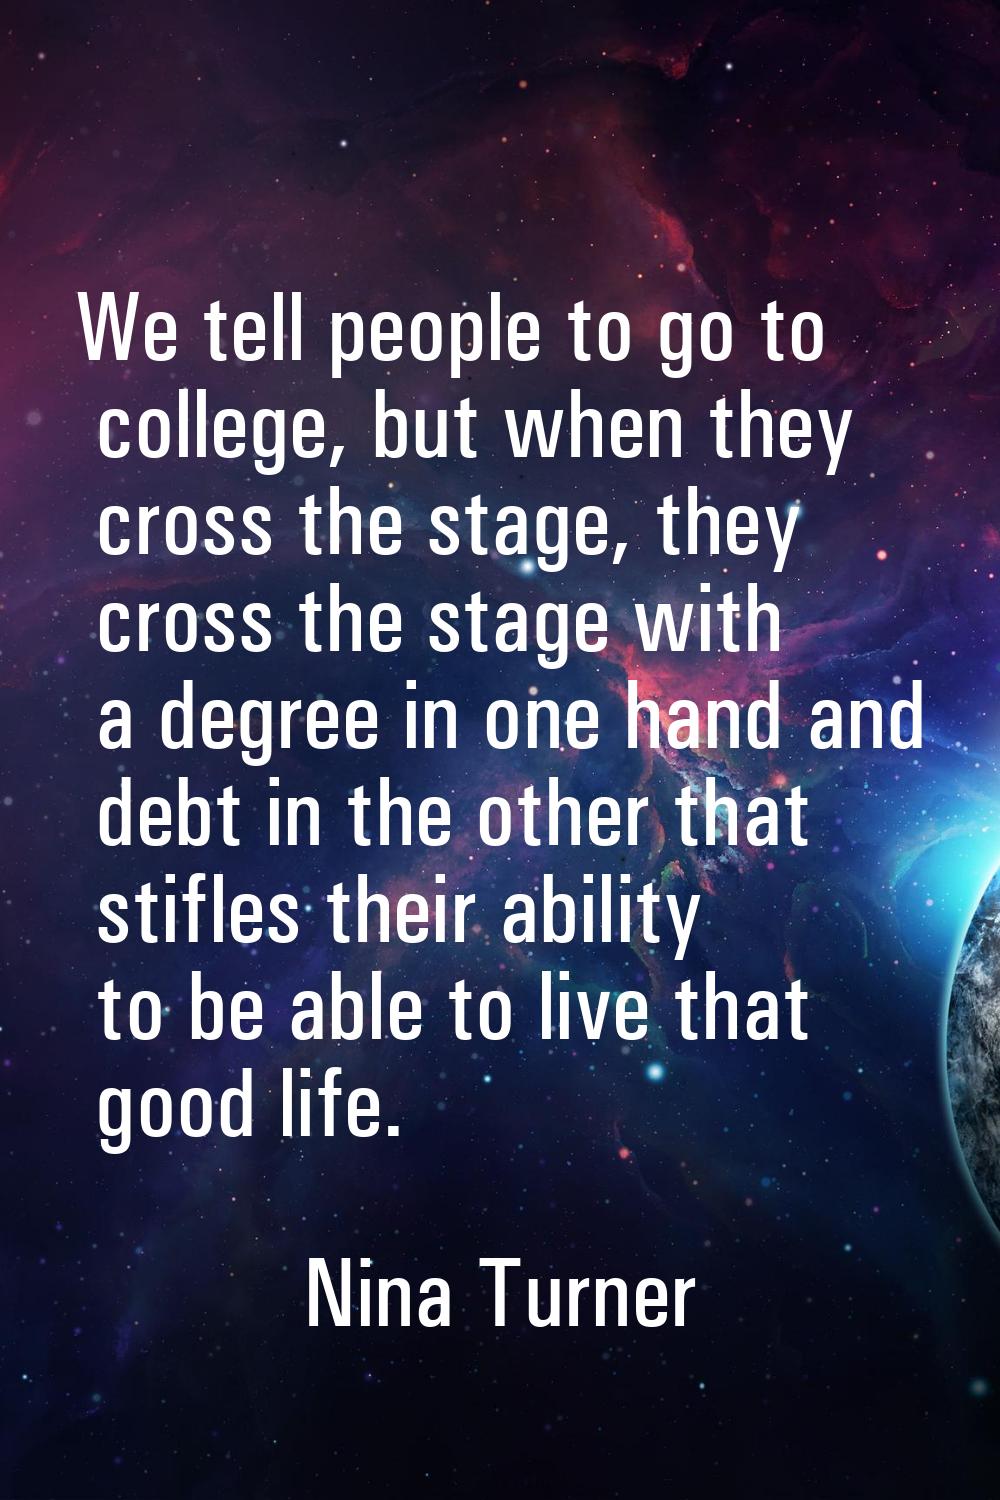 We tell people to go to college, but when they cross the stage, they cross the stage with a degree 